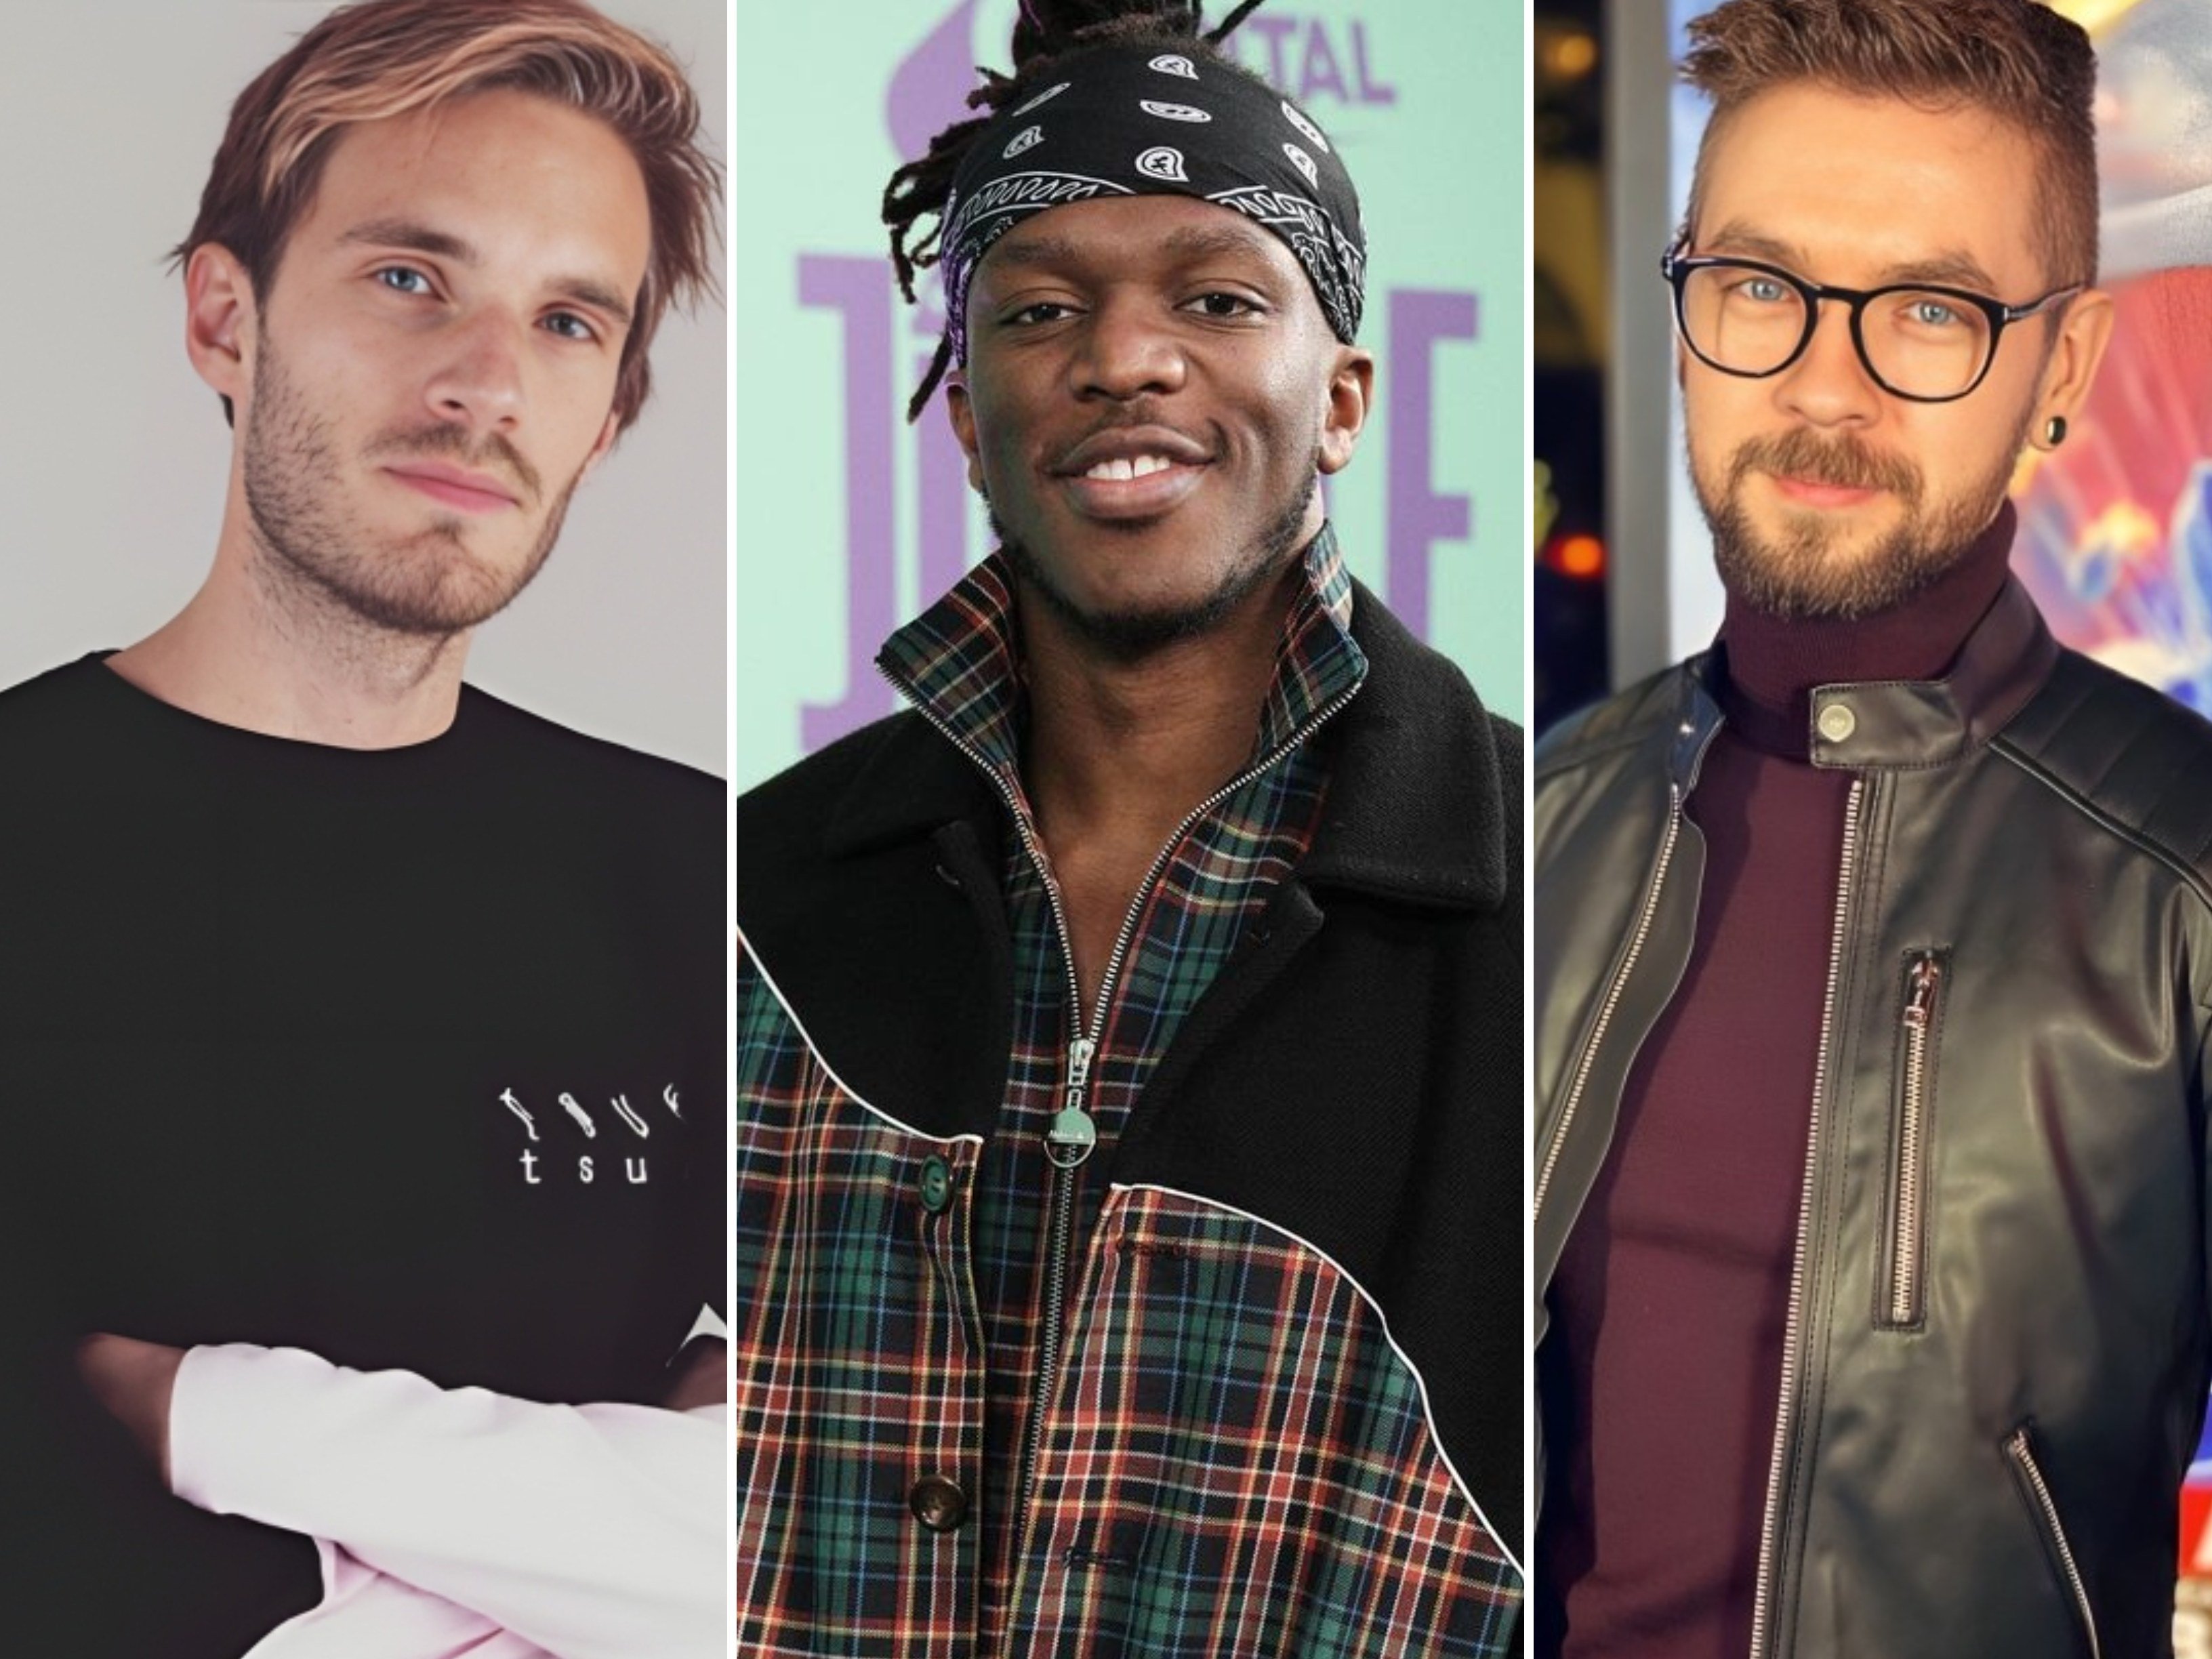 PewDiePie, KSI and Jacksepticeye are all YouTubers who have made big bucks off streaming and other income revenues. Photos: @jacksepticeye, @ksi @pewdiepie/Instagram